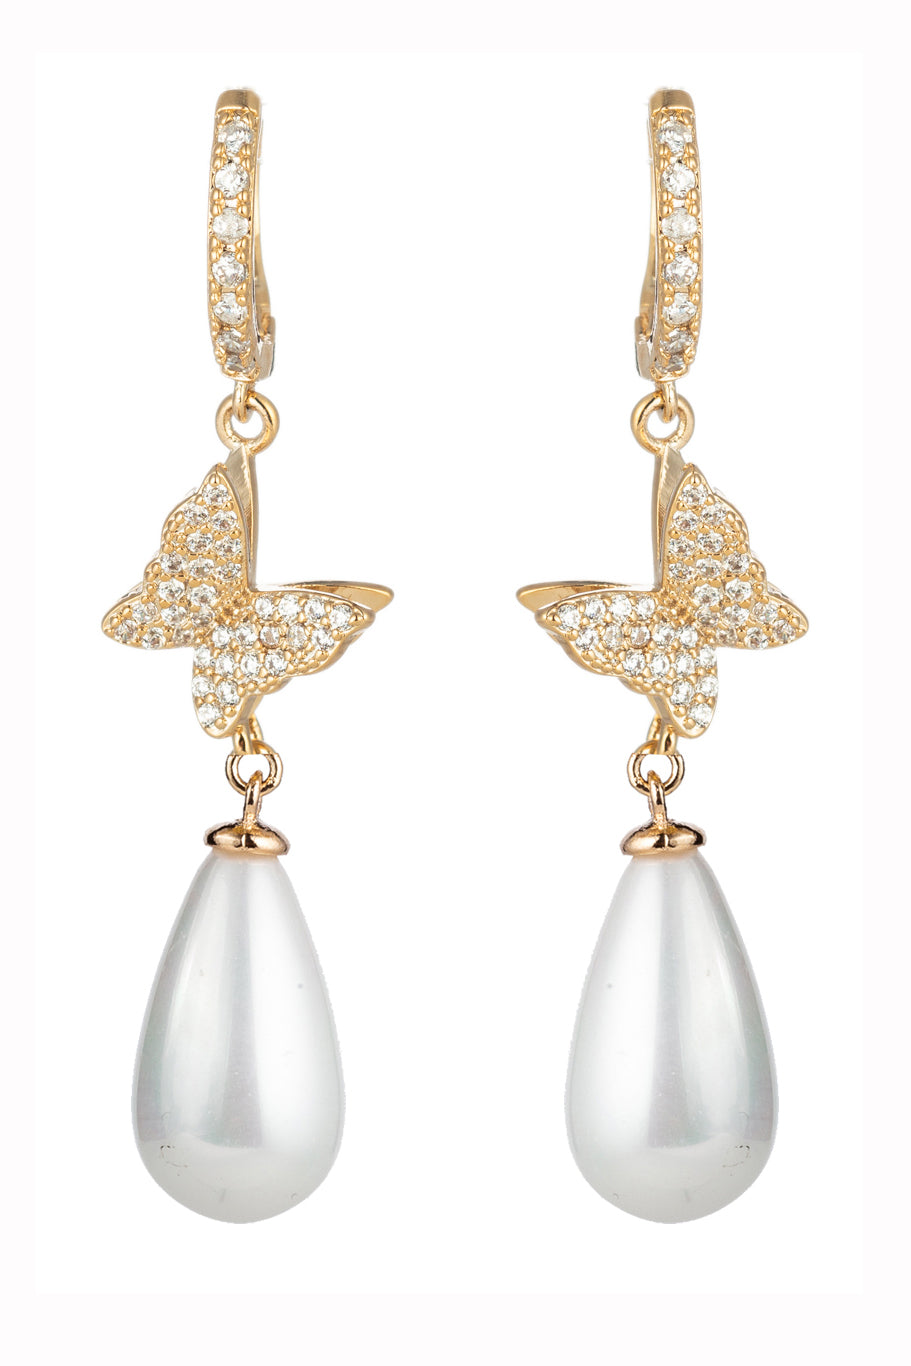 18k gold plated mini butterfly drop earrings with shell pearls.